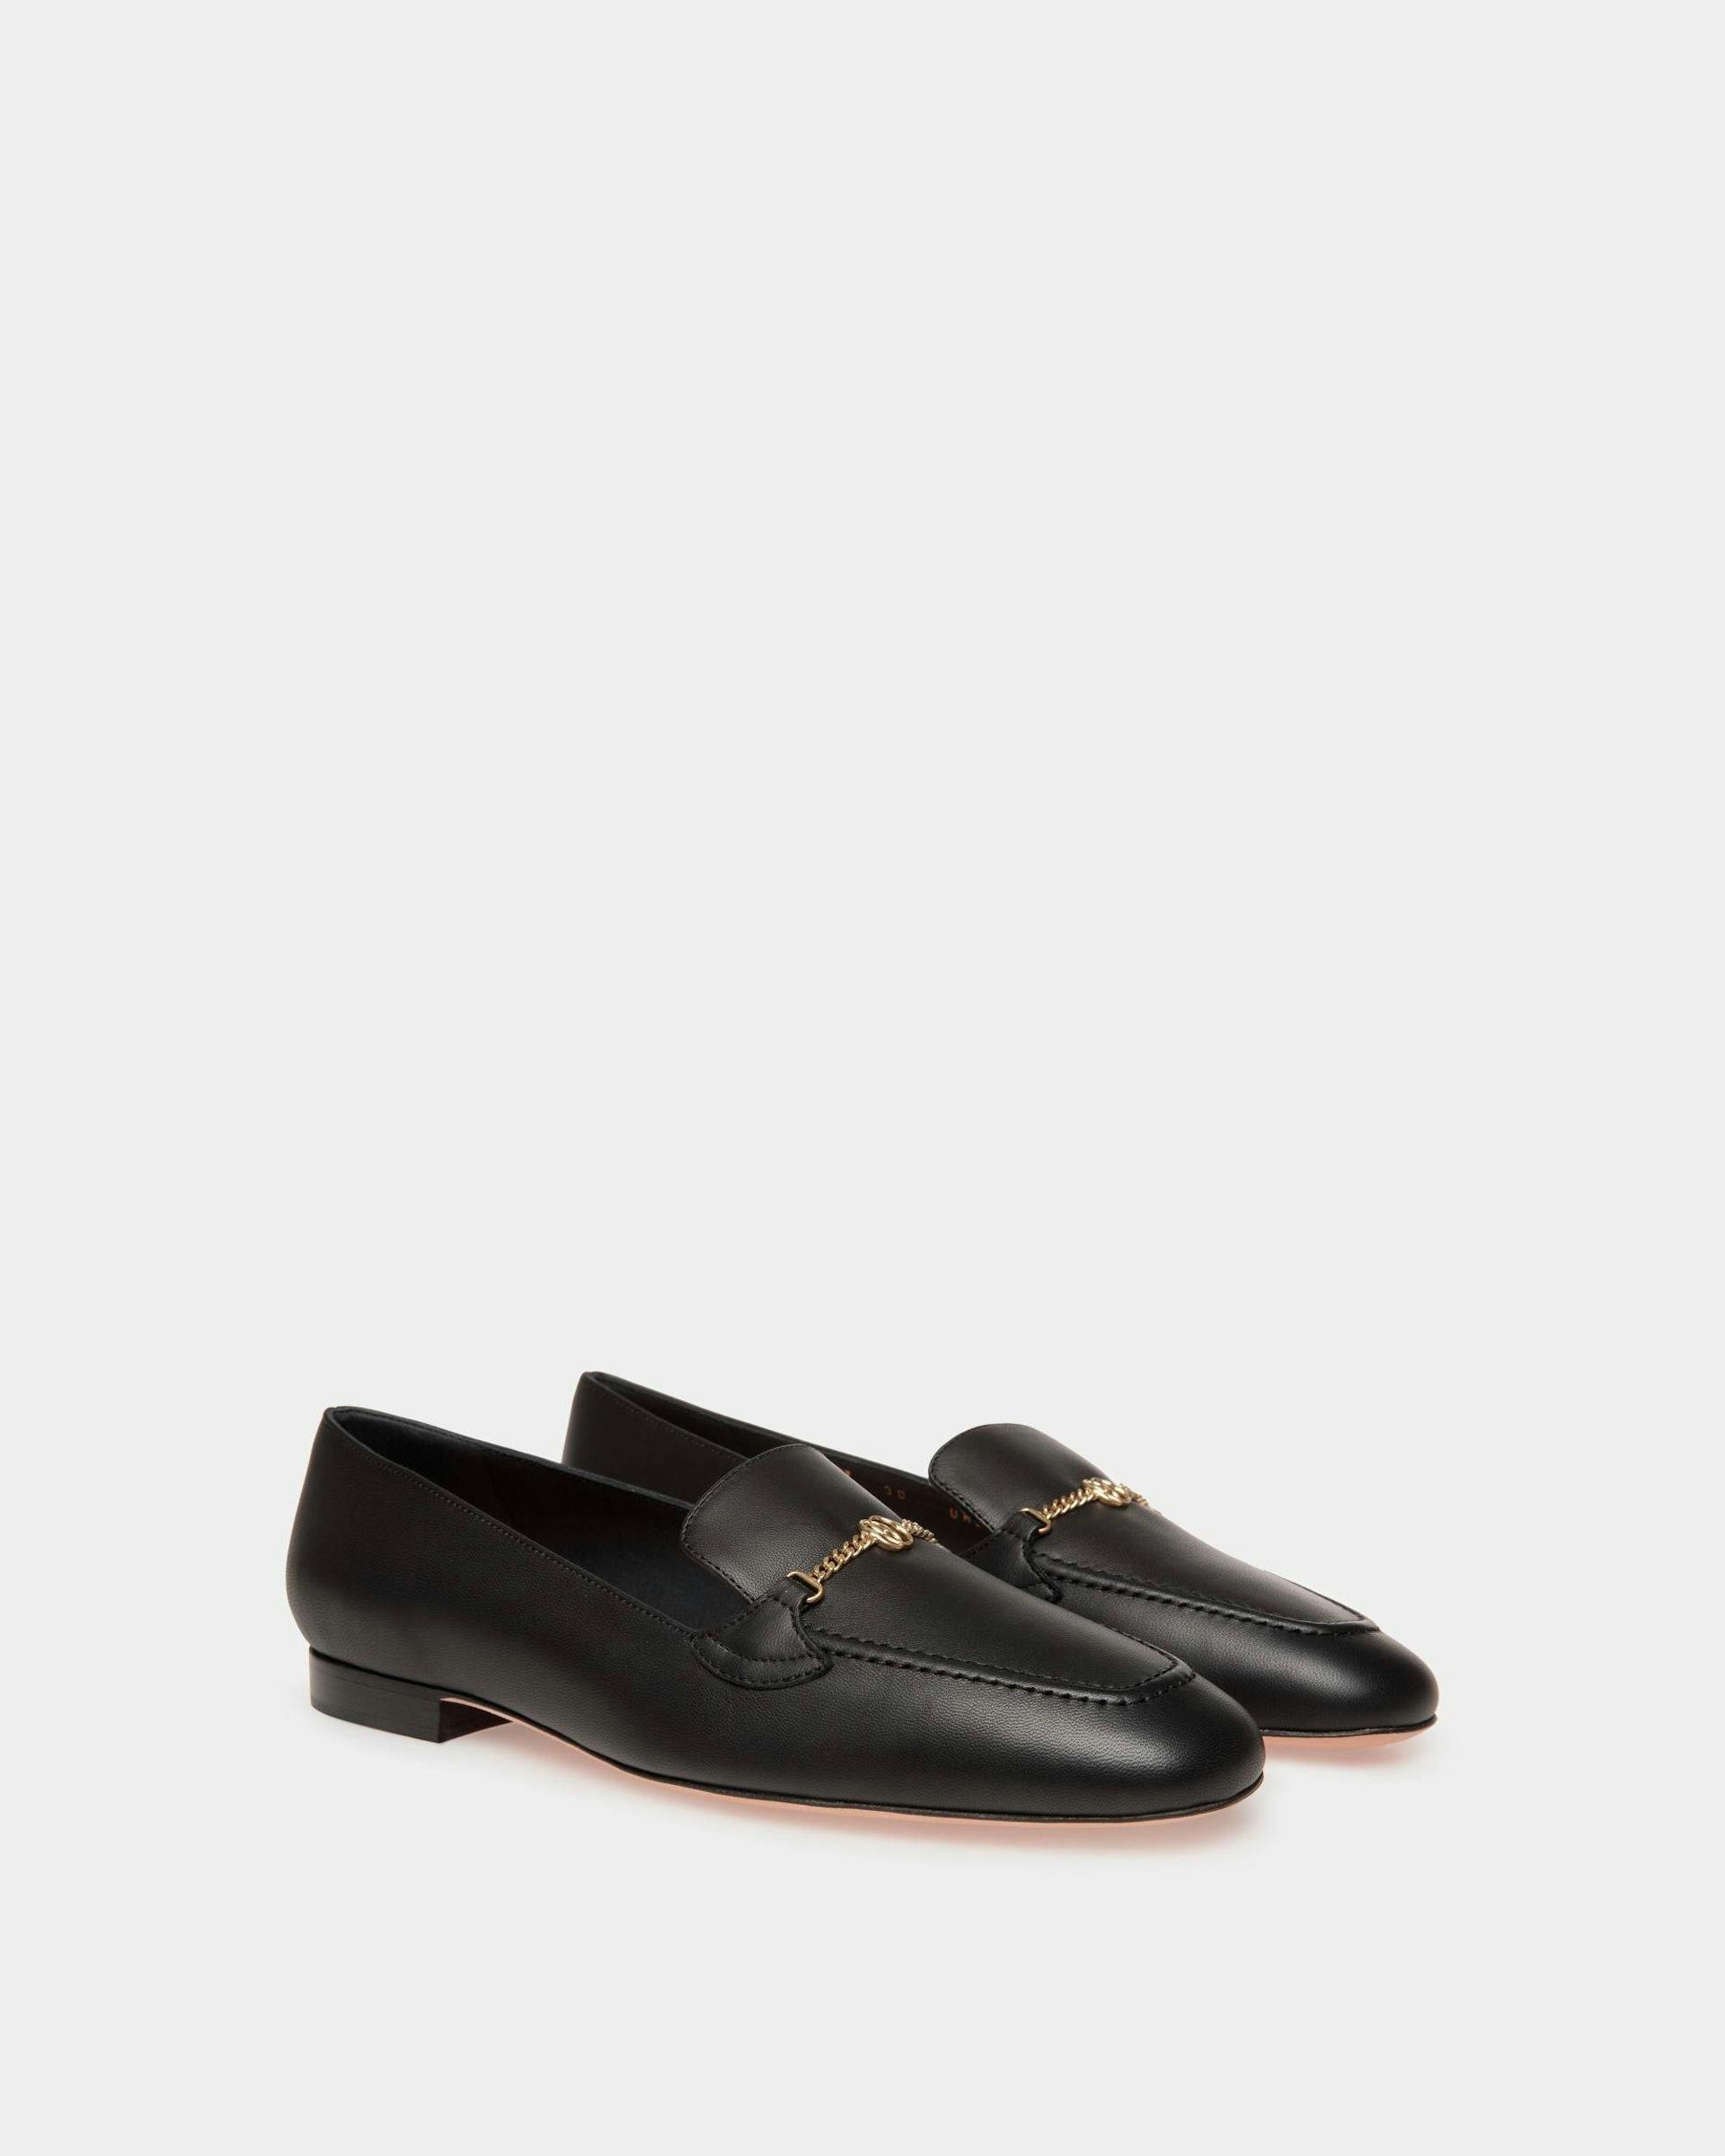 Women's Daily Emblem Loafer in Black Leather | Bally | Still Life 3/4 Front